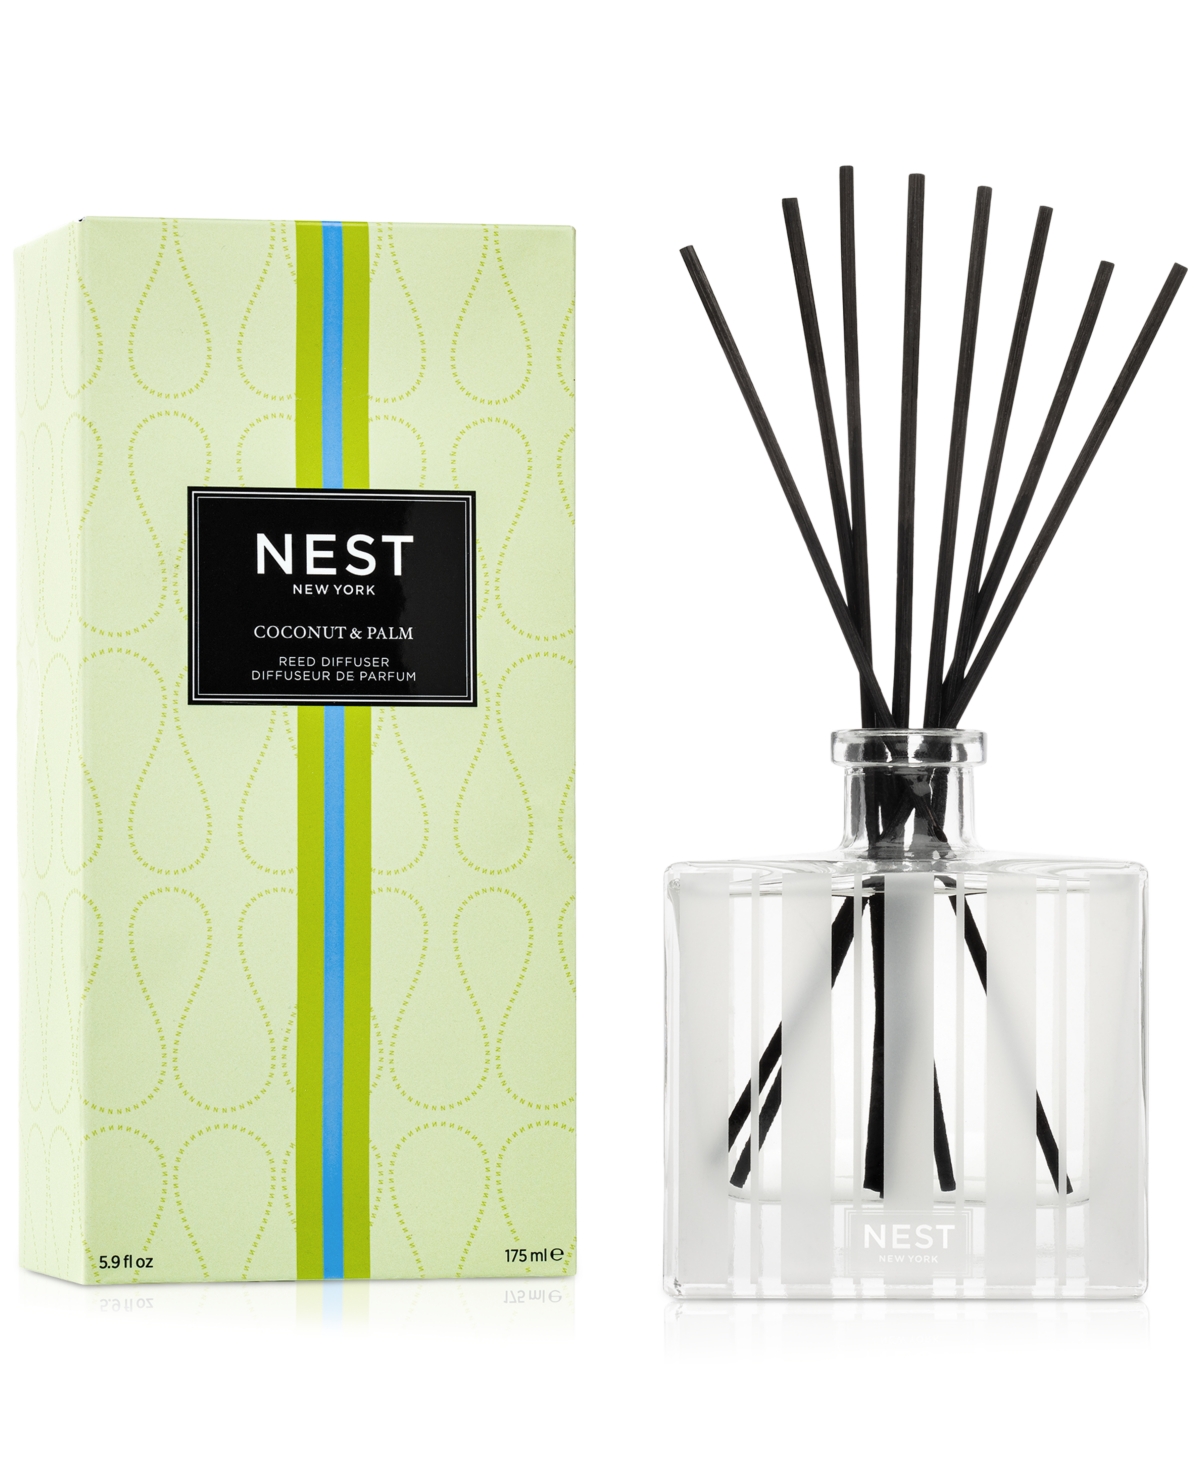 Coconut & Palm Reed Diffuser, 5.9 oz.